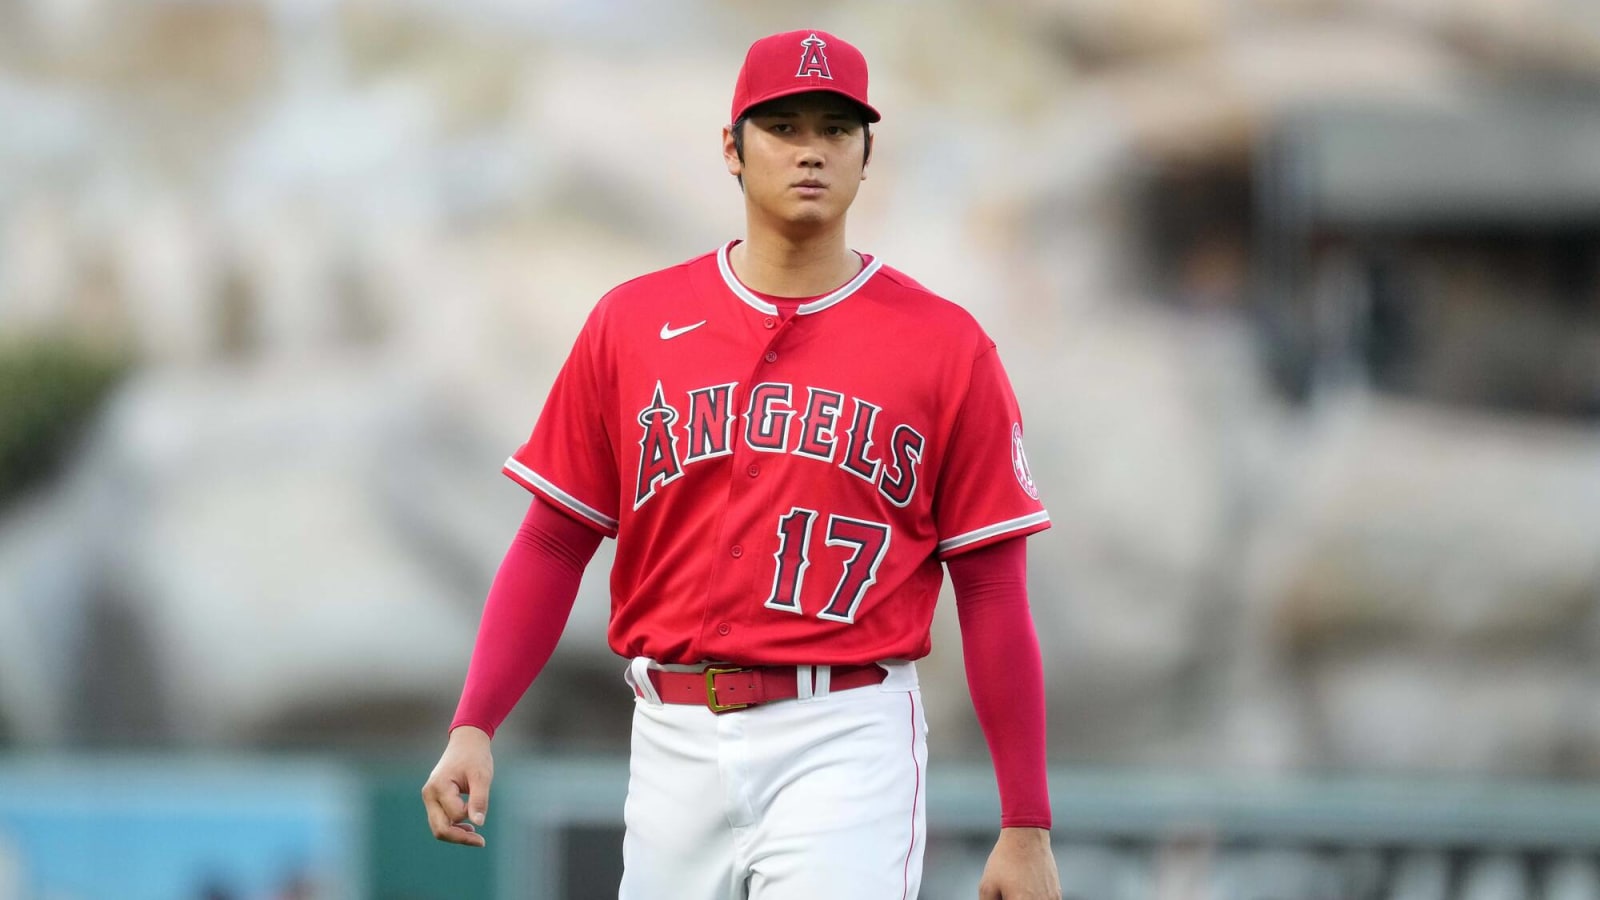 Shohei Ohtani Autographs Kody Clemens Strikeout Ball From Monday’s 10-0 Angels Win